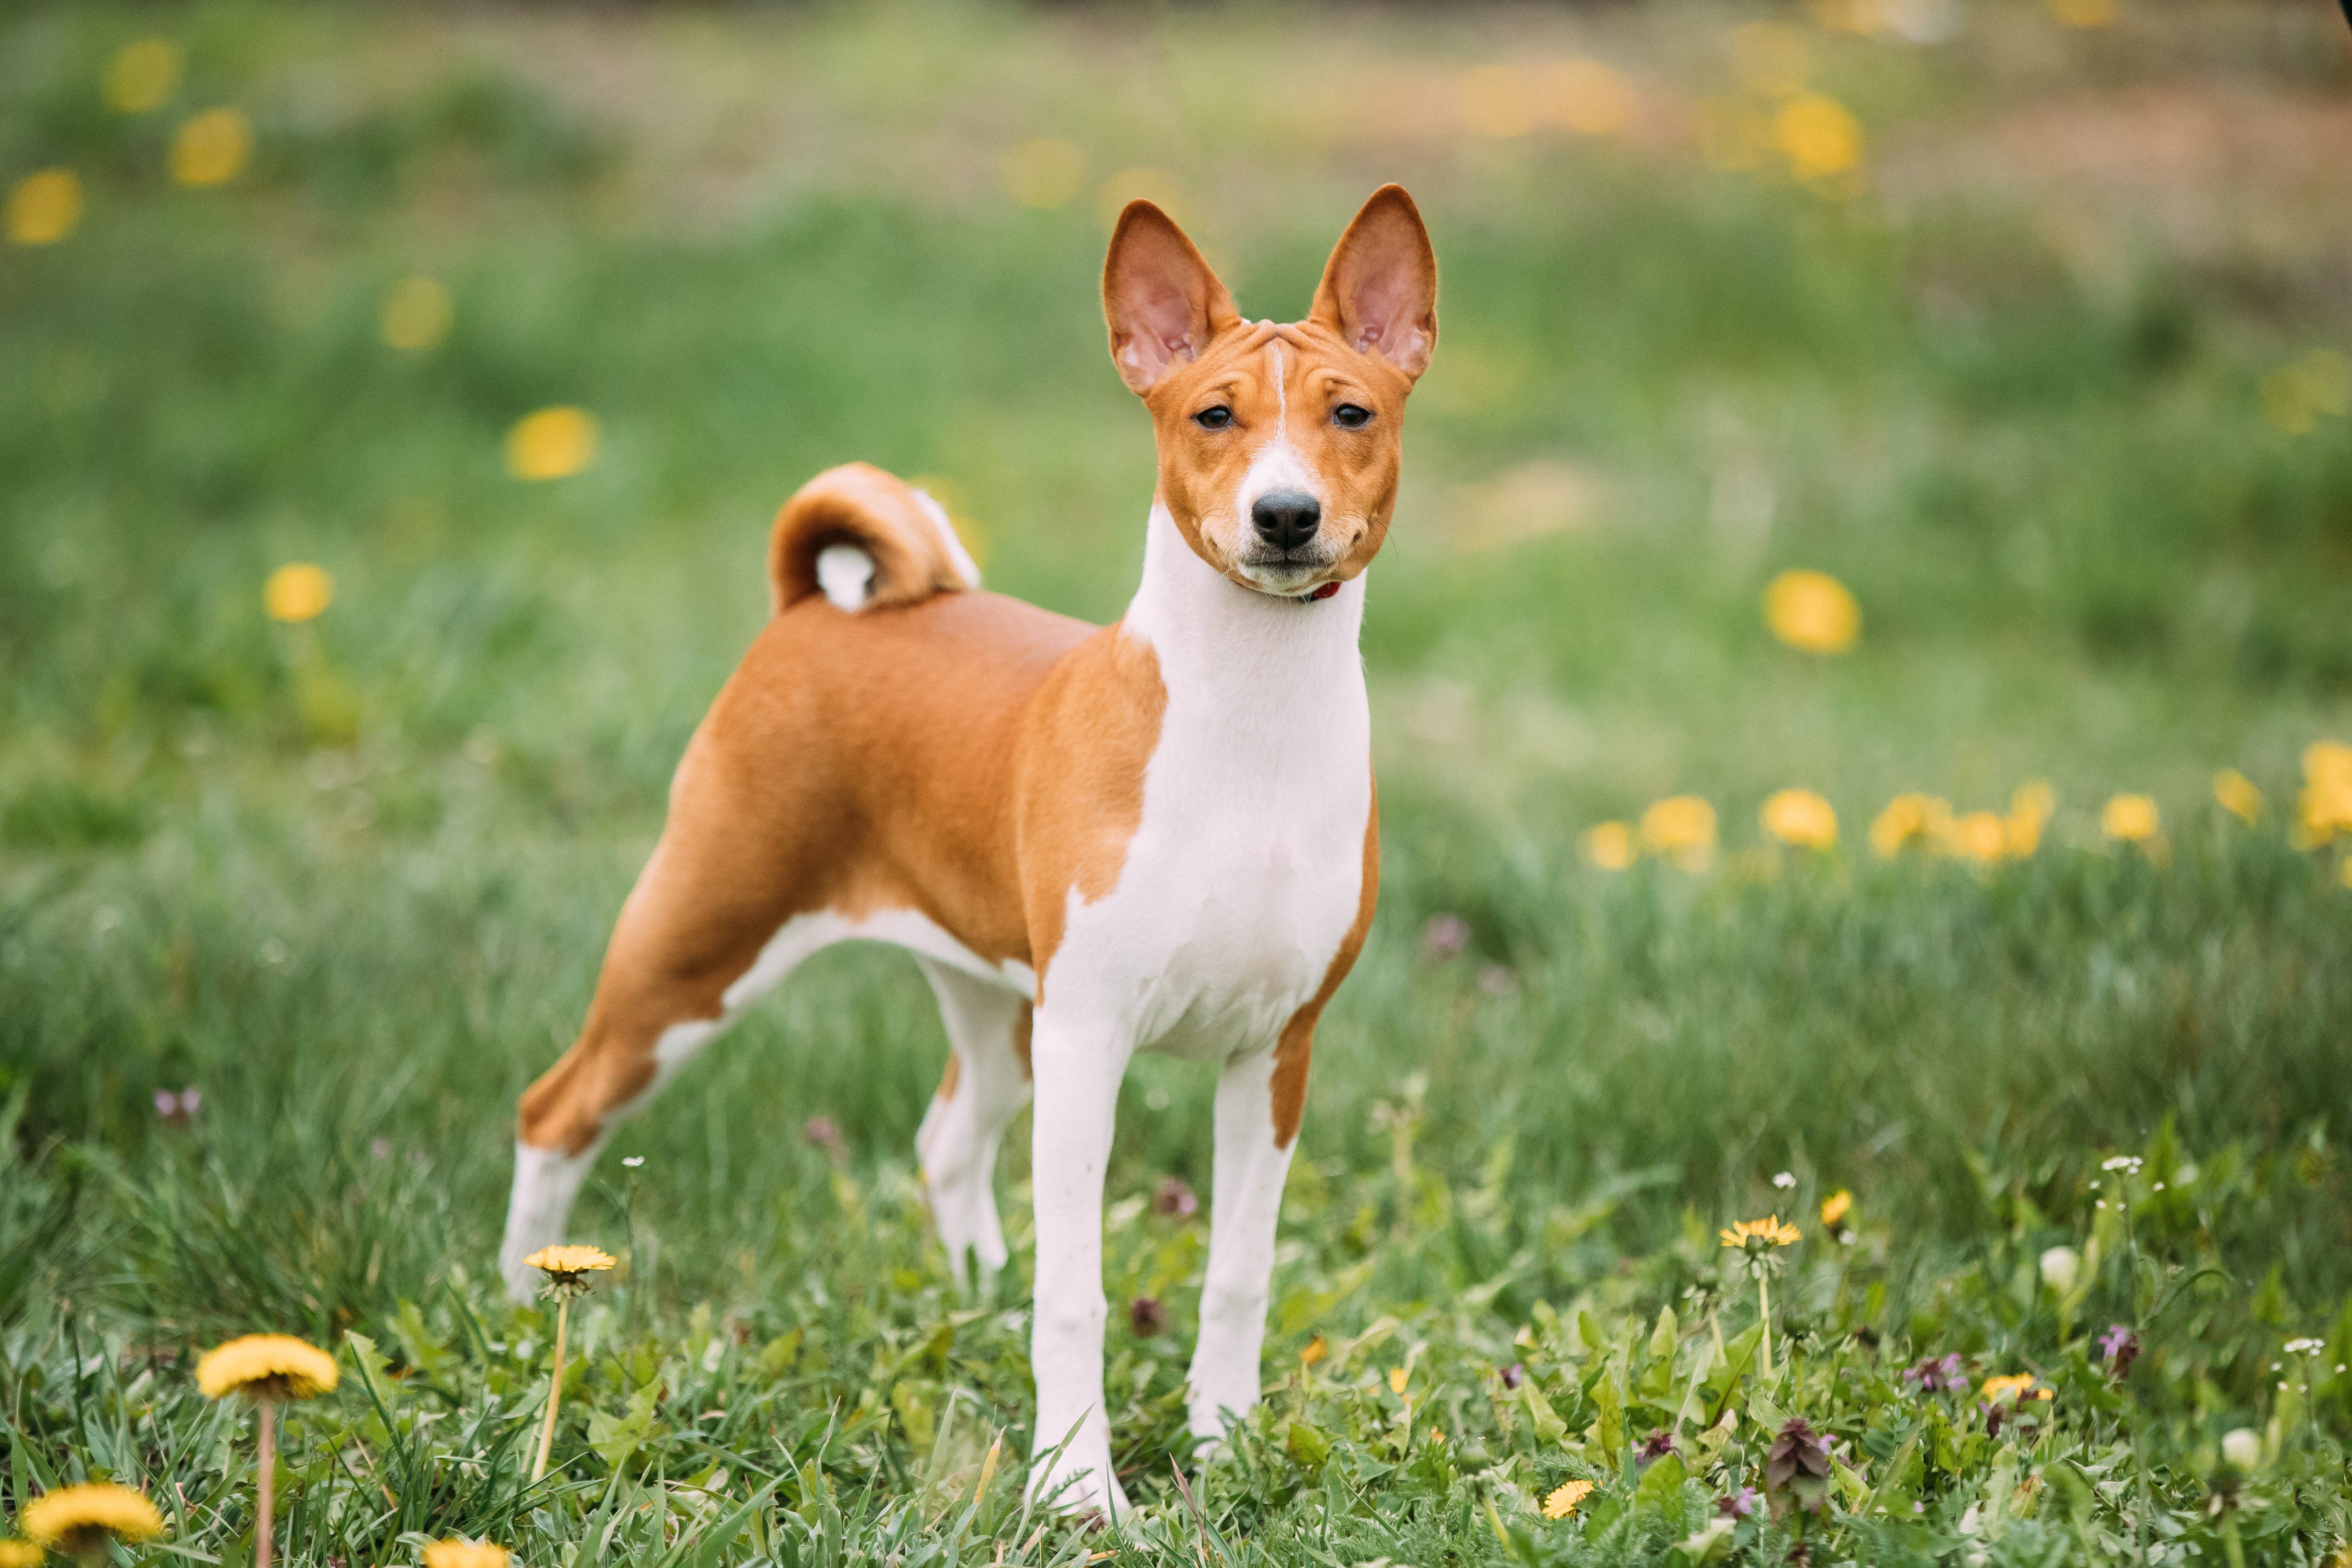 Basenji Kongo Terrier Dog. The Basenji Is A Breed Of Hunting Dog. It Was Bred From Stock That Originated In Central Africa.